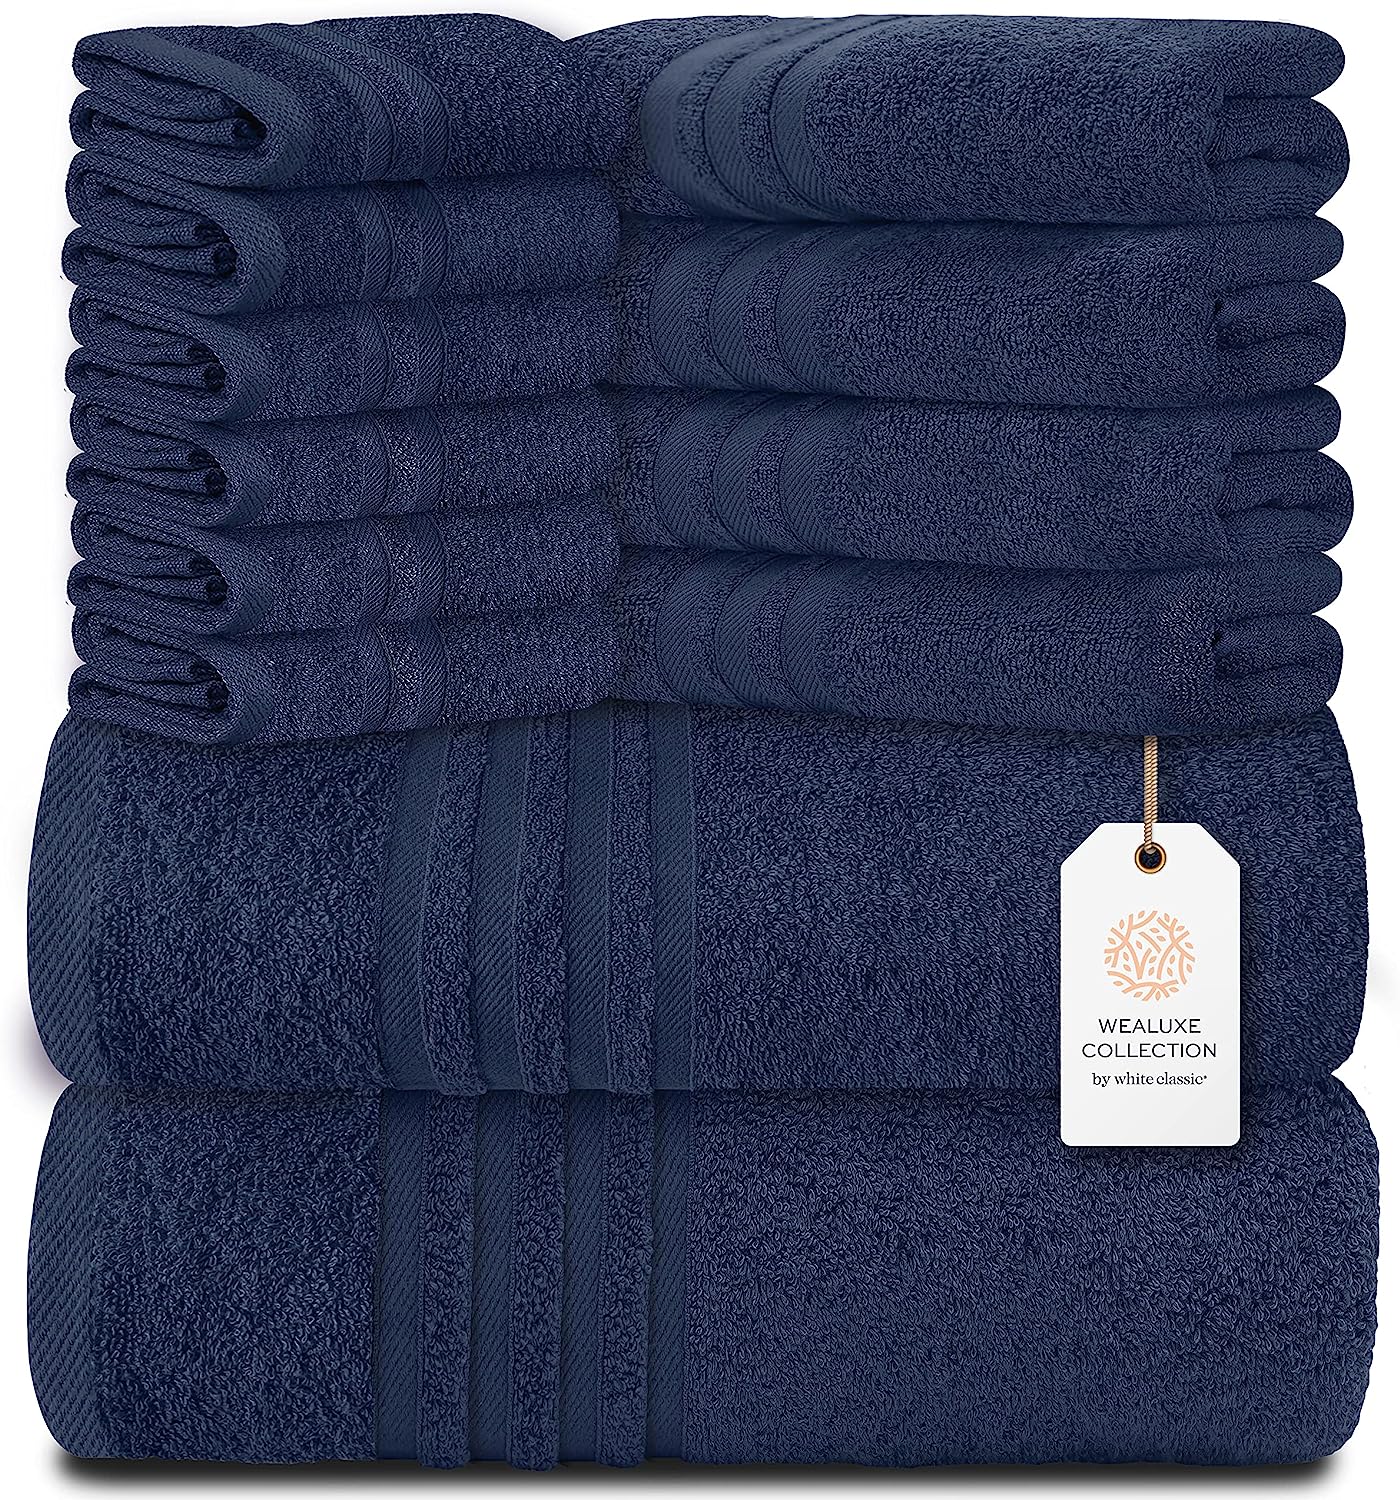 Welauxe Collection 8Pc Navy Blue Towel Set